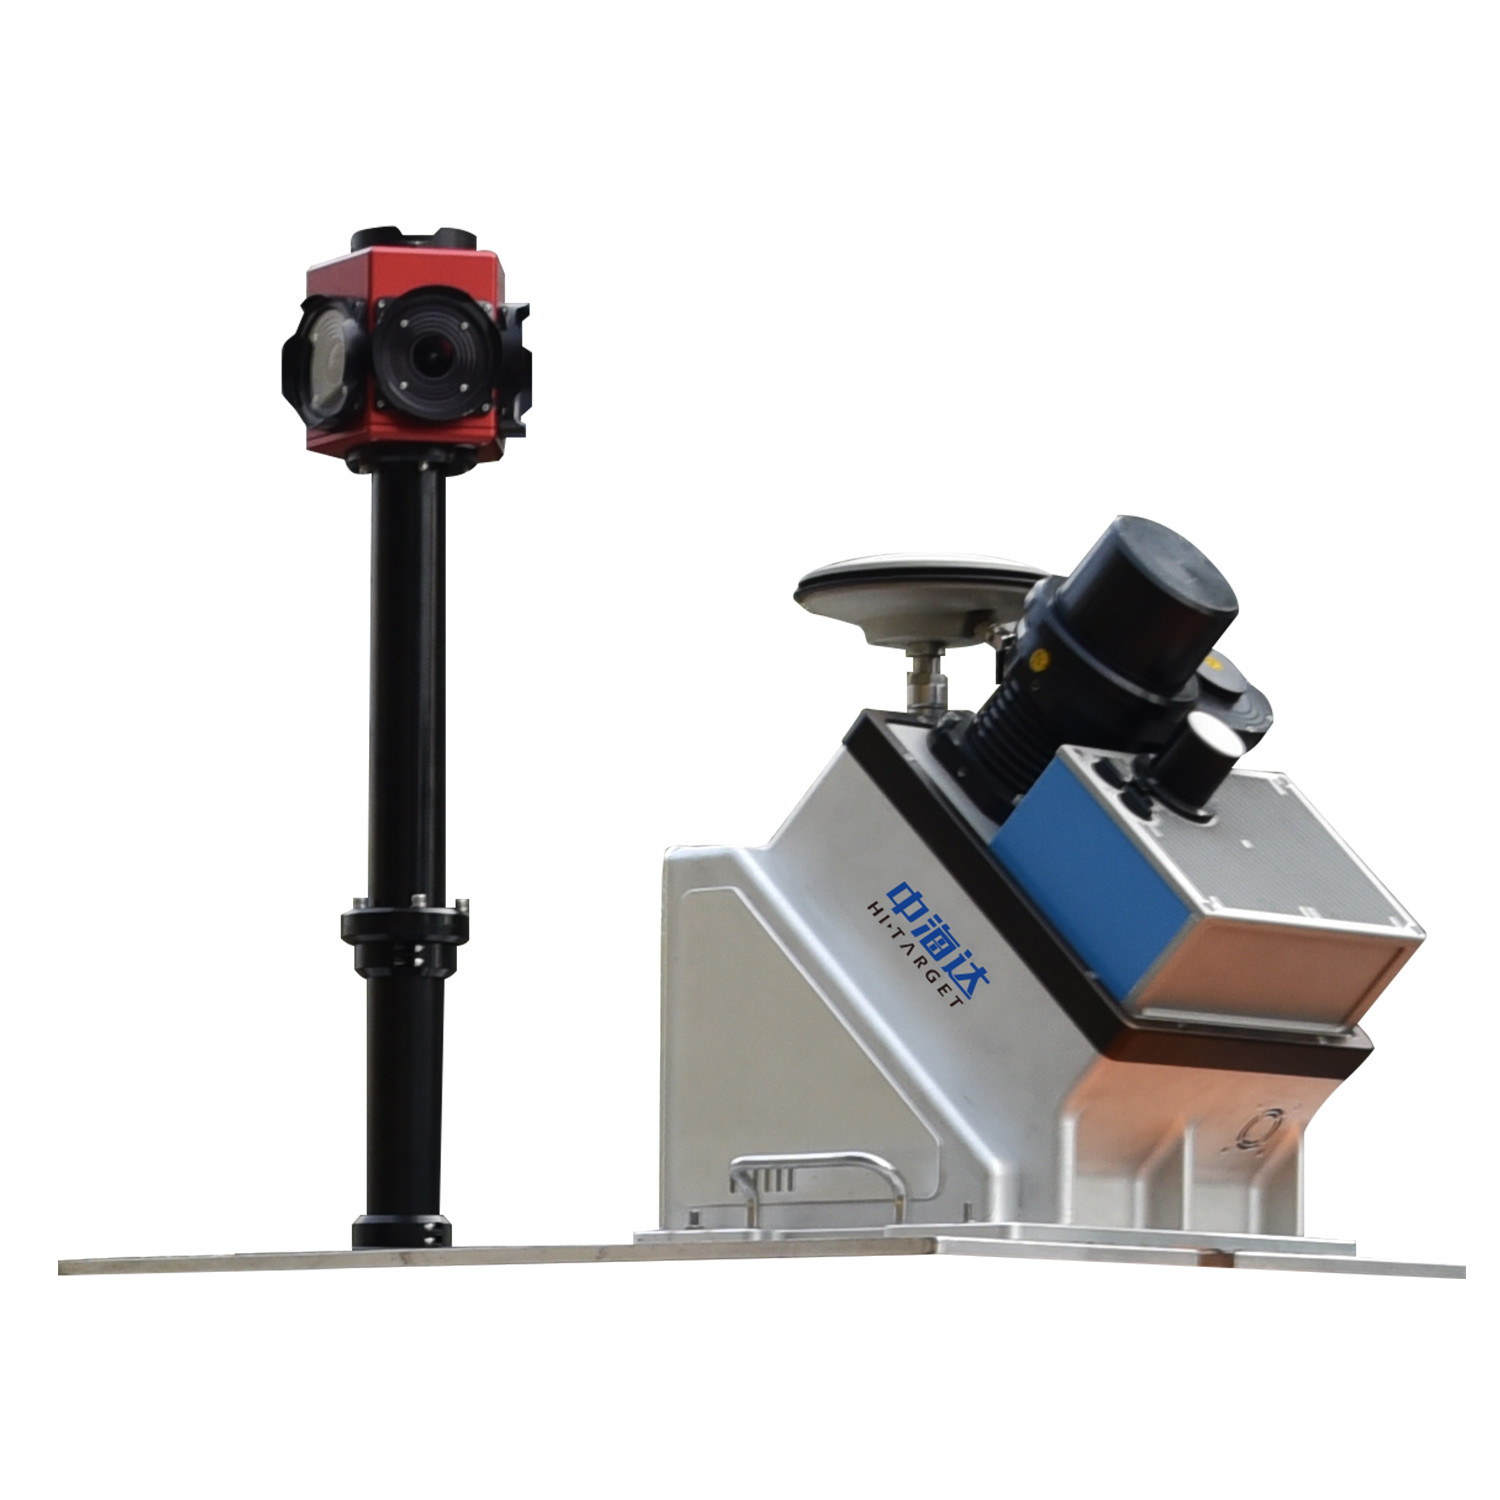  HiScan-Z Mobile LiDAR Mapping System Equipment 119m Range 1mm@50m Range Accuracy Manufactures